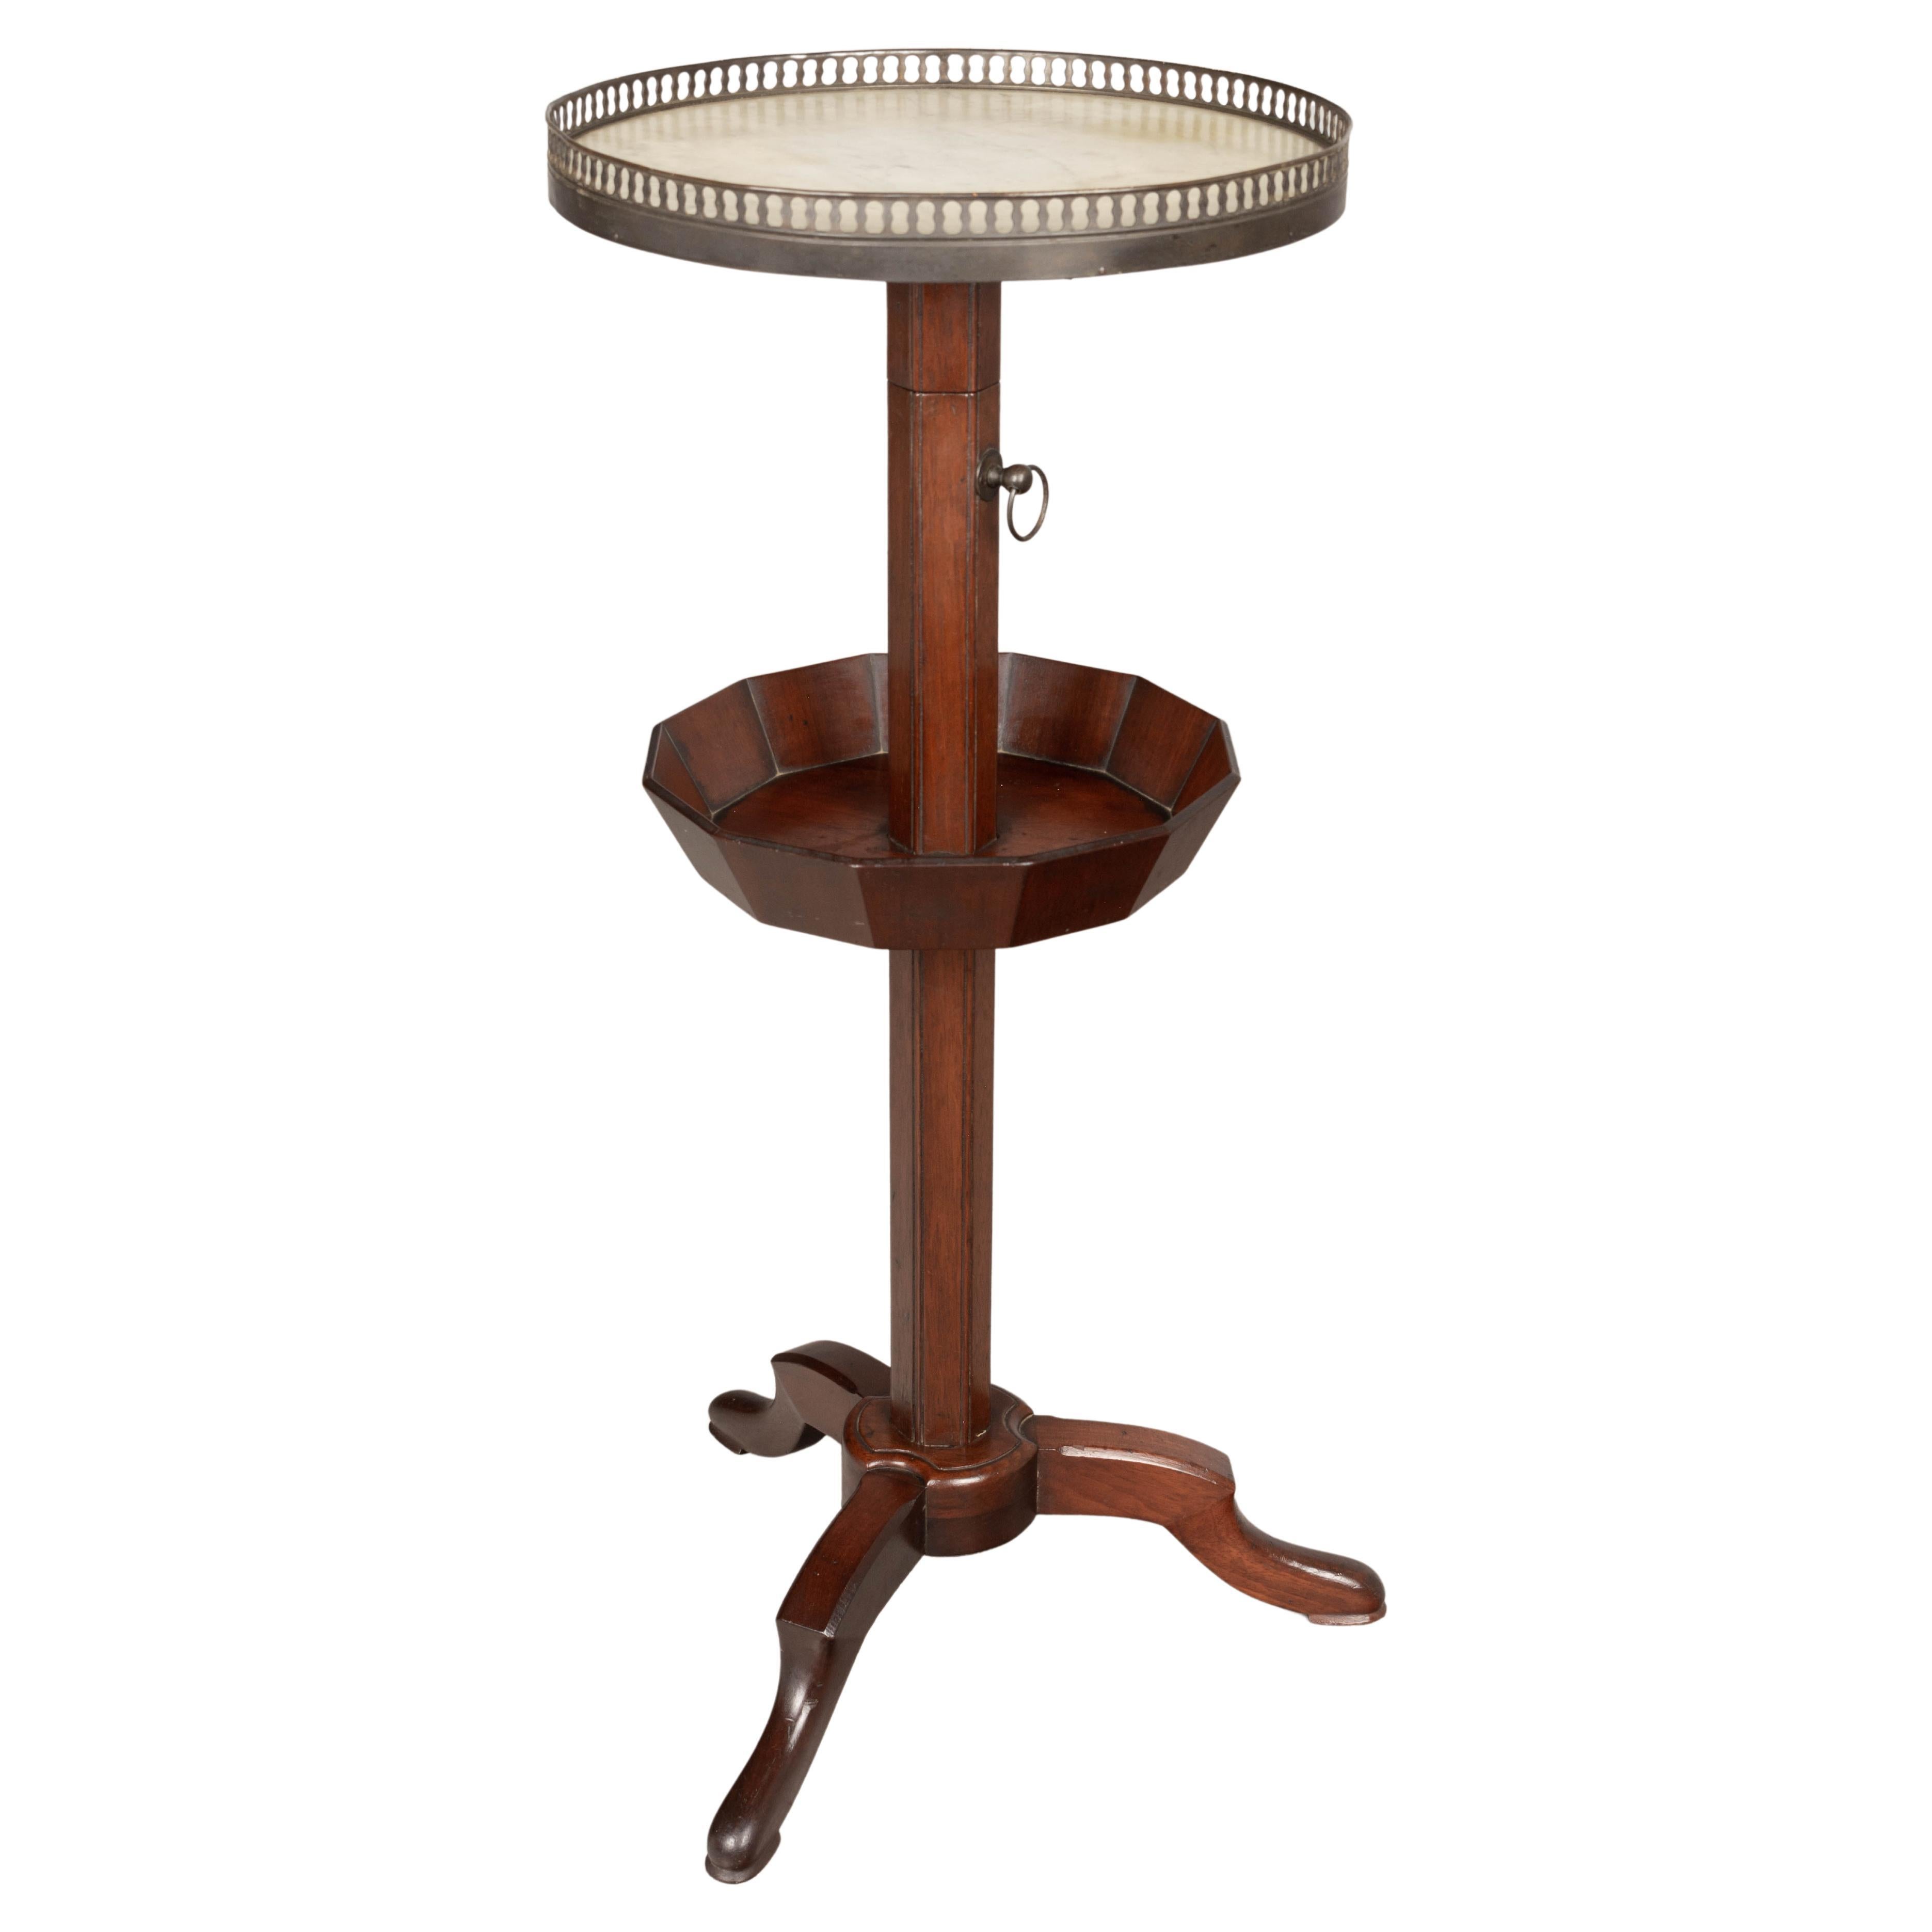 19th Century French Adjustable Pedestal or Side Table